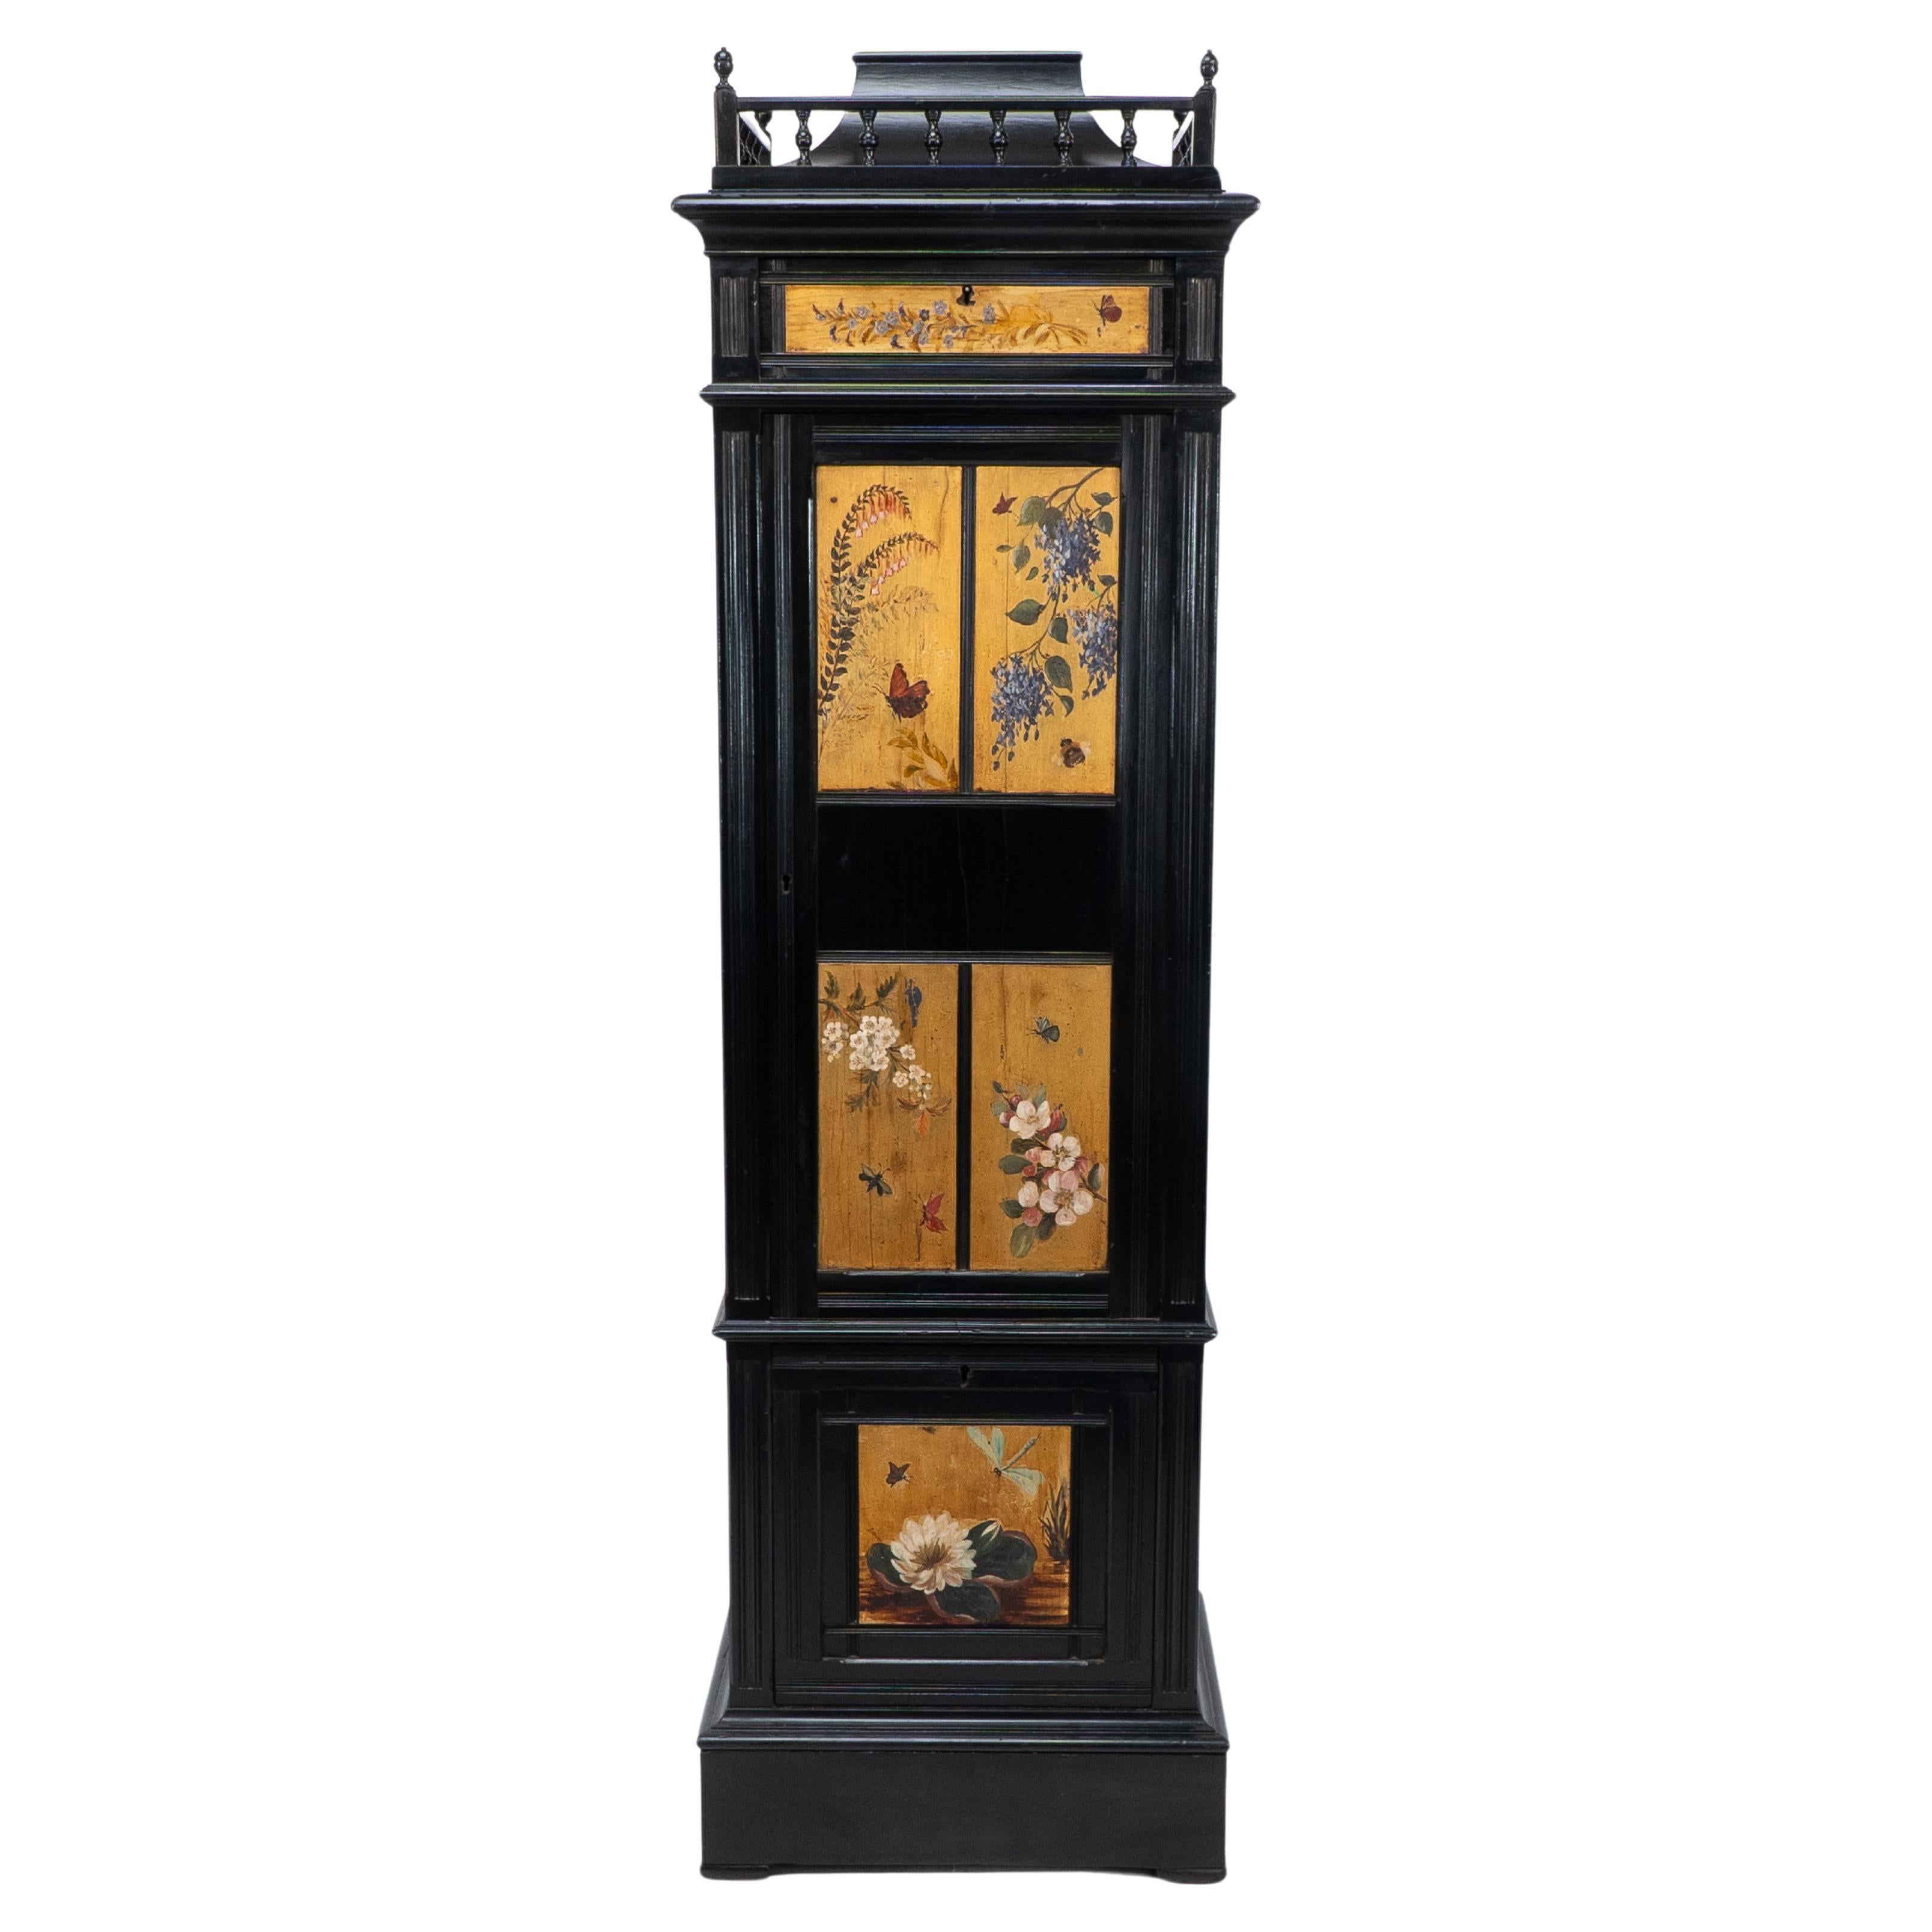 A rare Aesthetic Movement ebonized polychrome painted Humidor with a shaped display plinth to the top, surrounded with a turned gallery, and an upper compartmented drawer hand painted with a spray of flowers and a hovering butterfly. On the main